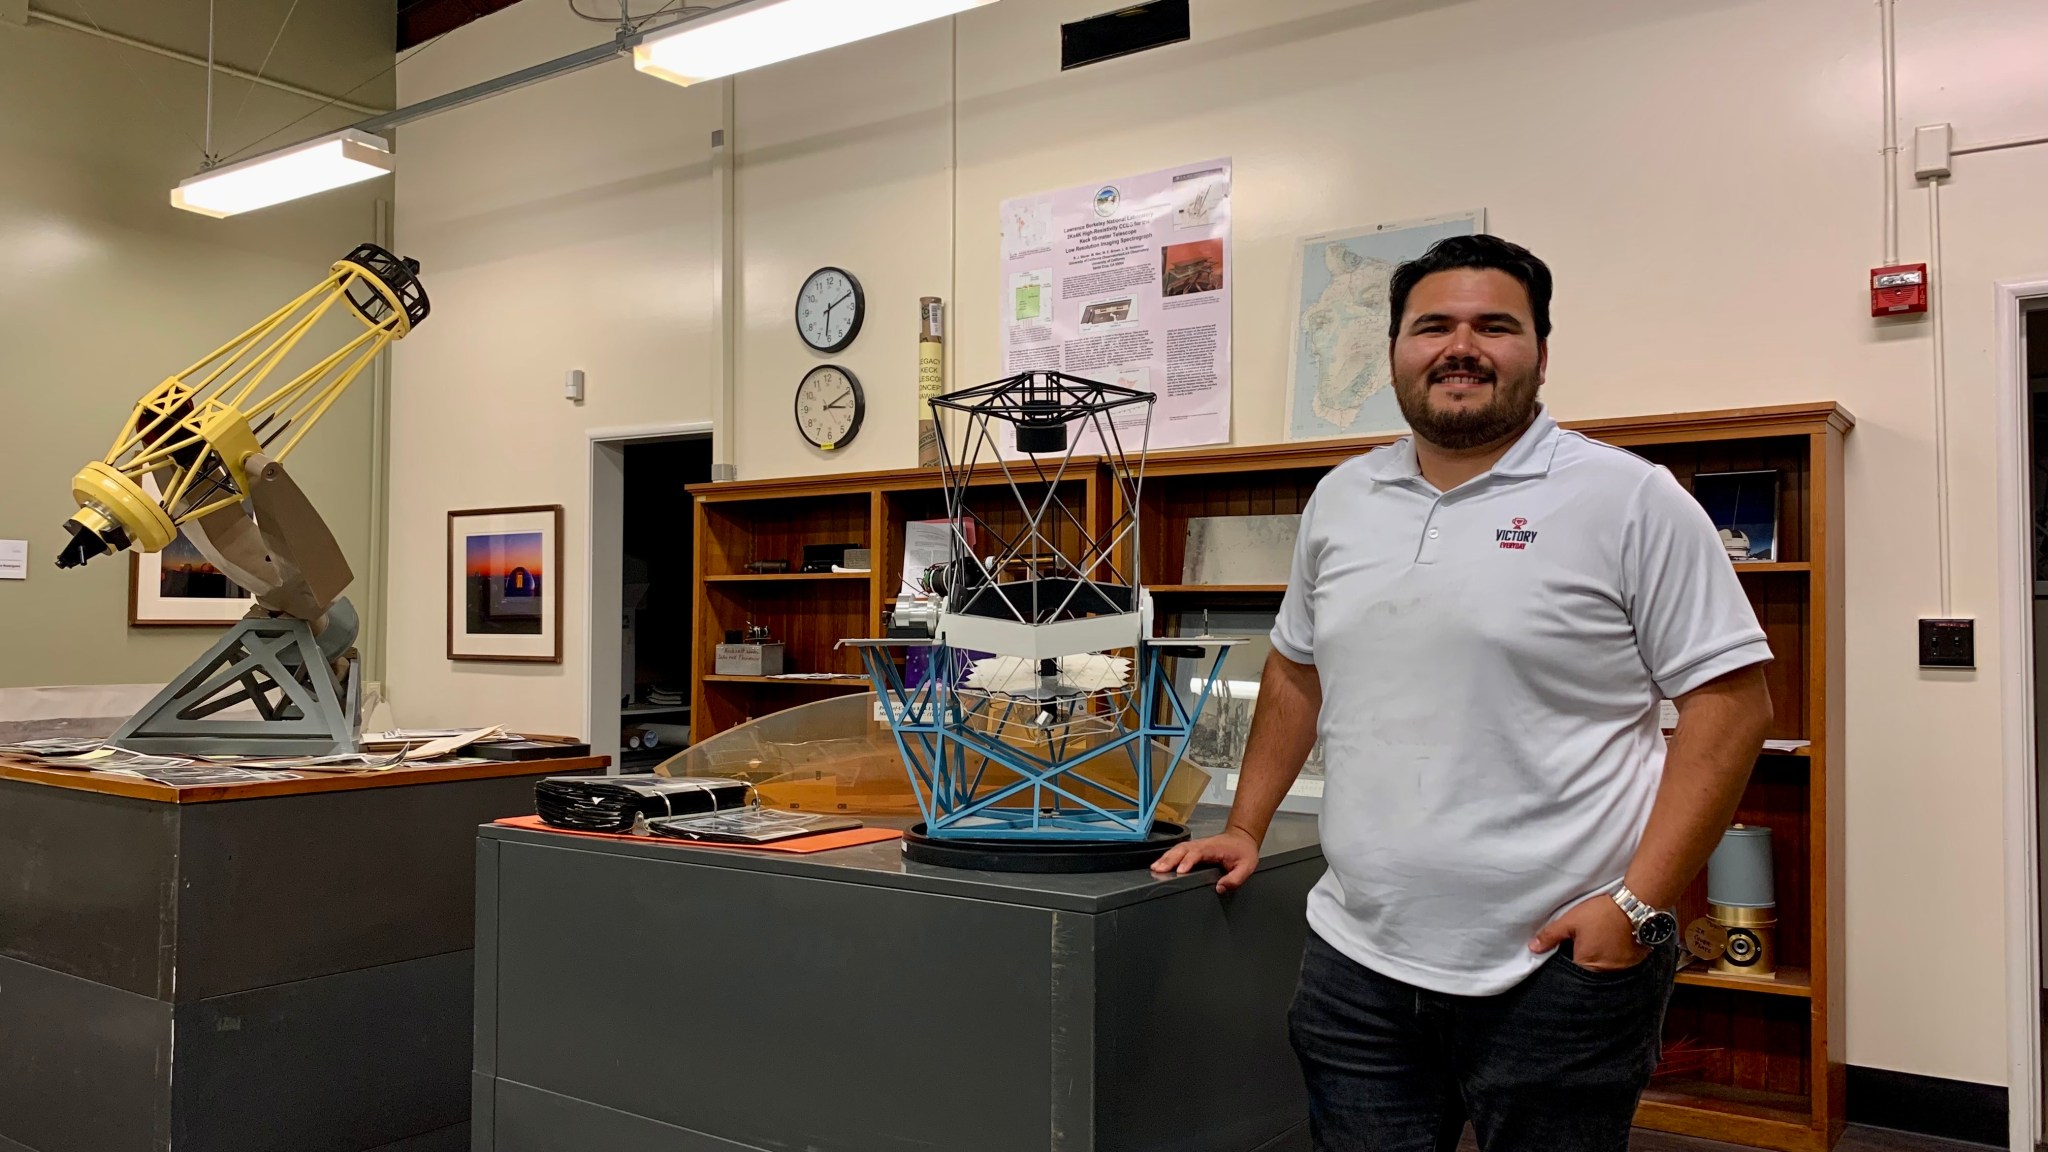 Cal Poly Pomona graduate Cristian Rodriguez in the lab at University of California Observatories (UCO) in Santa Cruz, the Shane telescope (model shown far left), and Hawaii’s Keck telescope (model on the right).